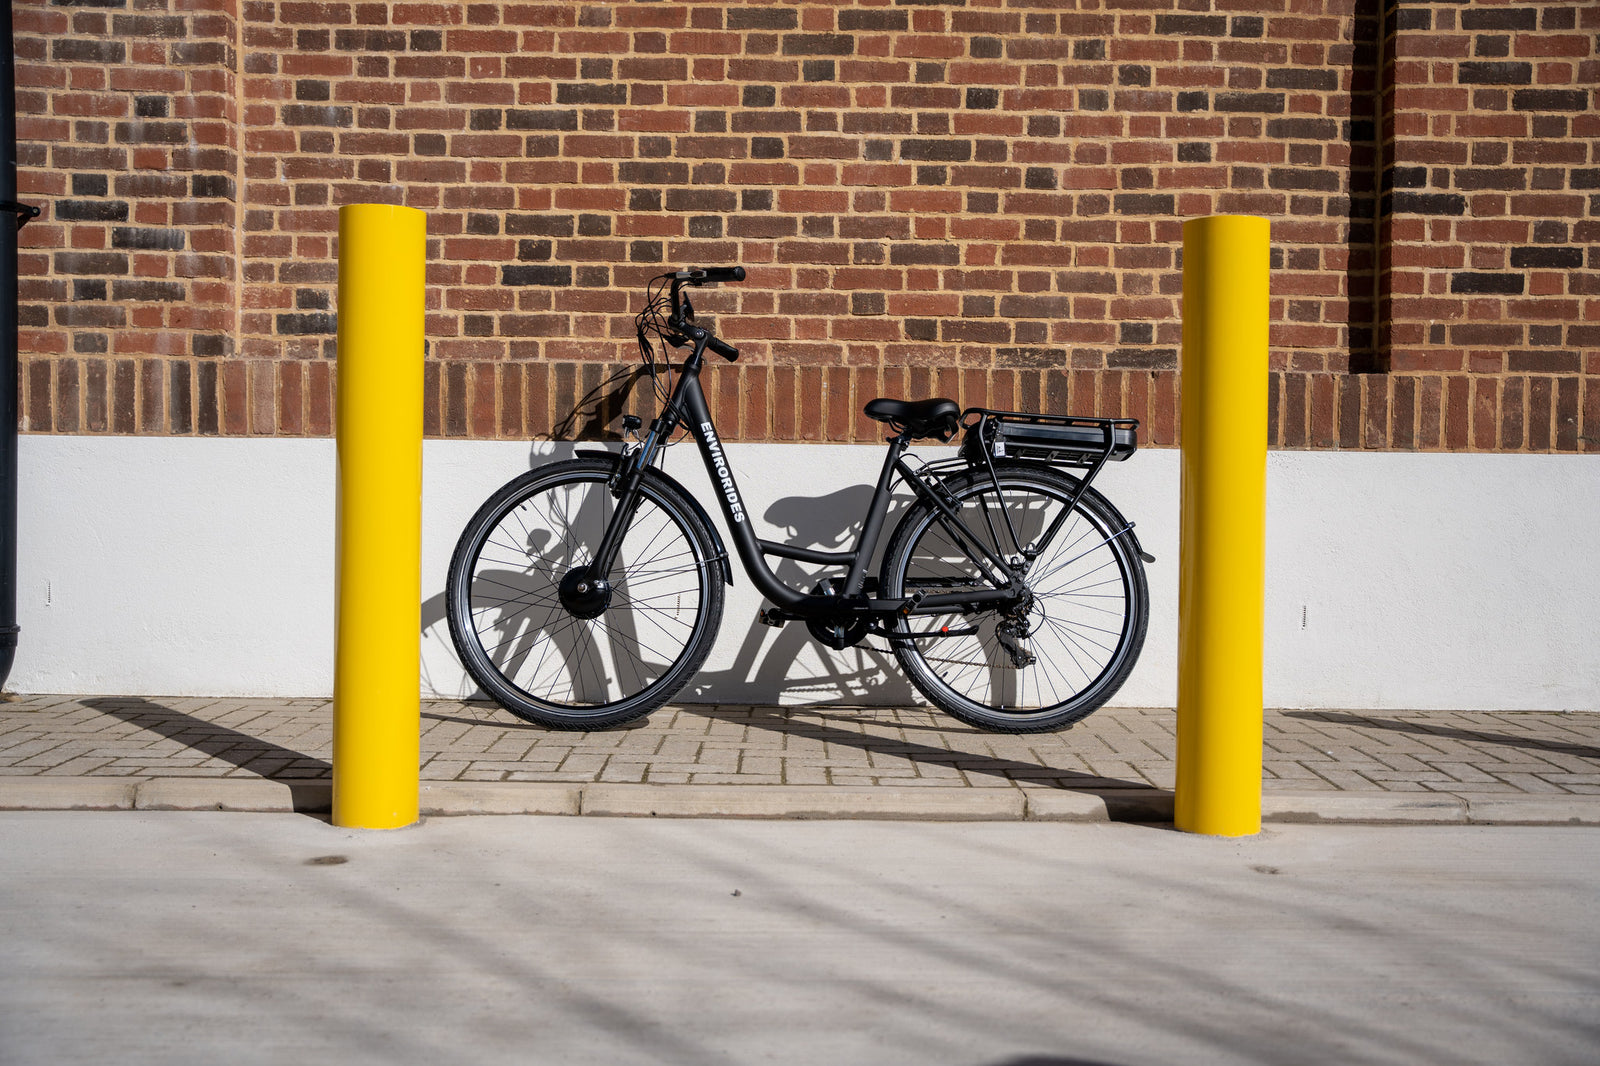 An EnviroRides eBike between two posts on a pavement